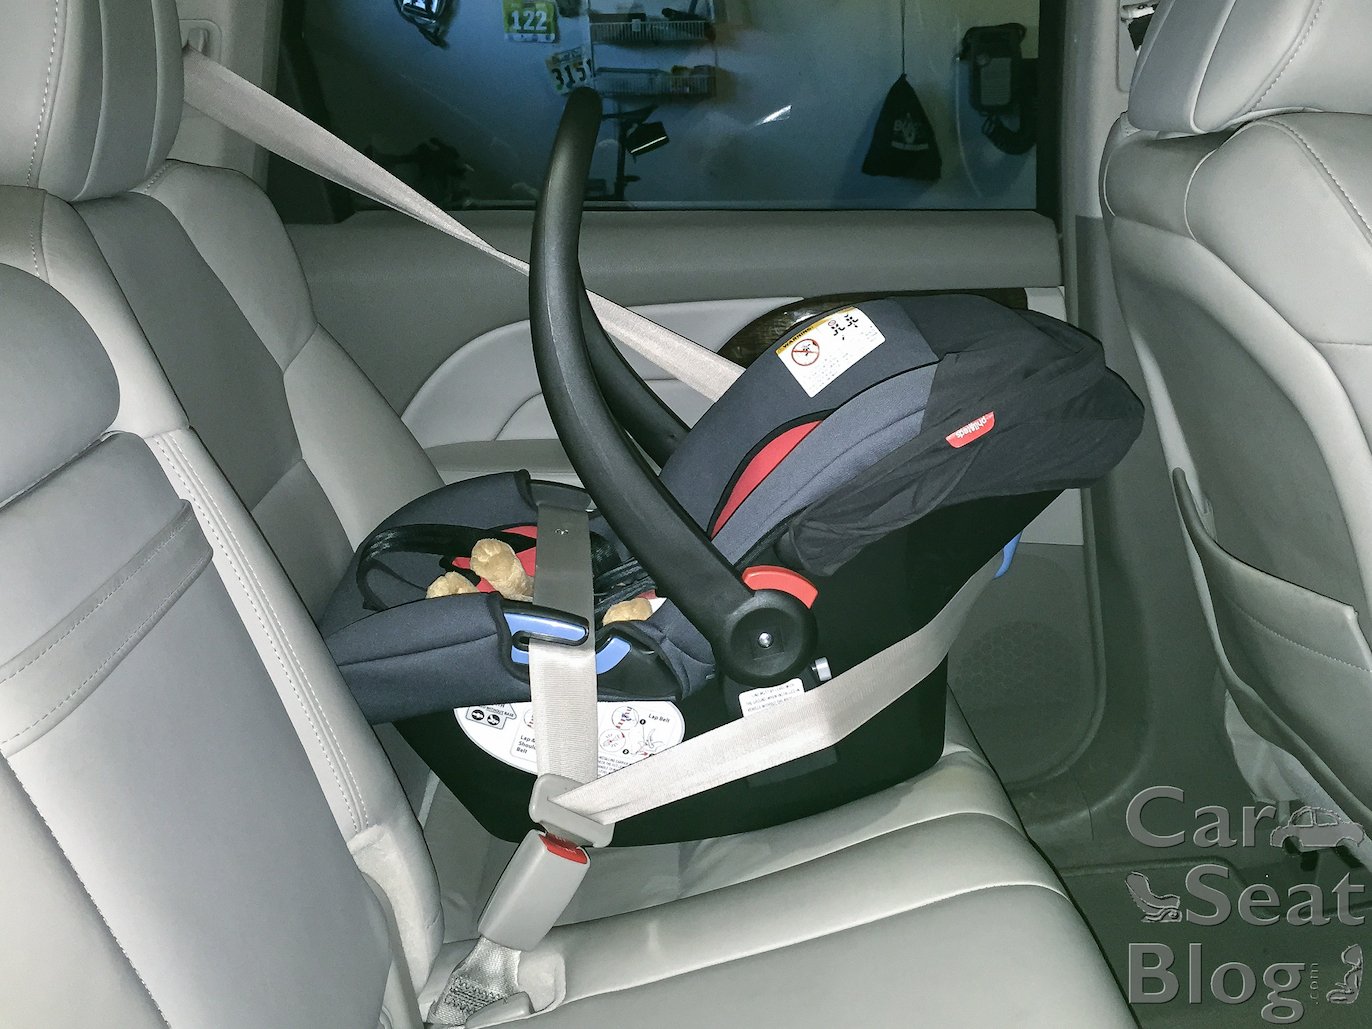 Rear Facing Cats With European, How To Install Venicci Baby Car Seat With Seatbelt